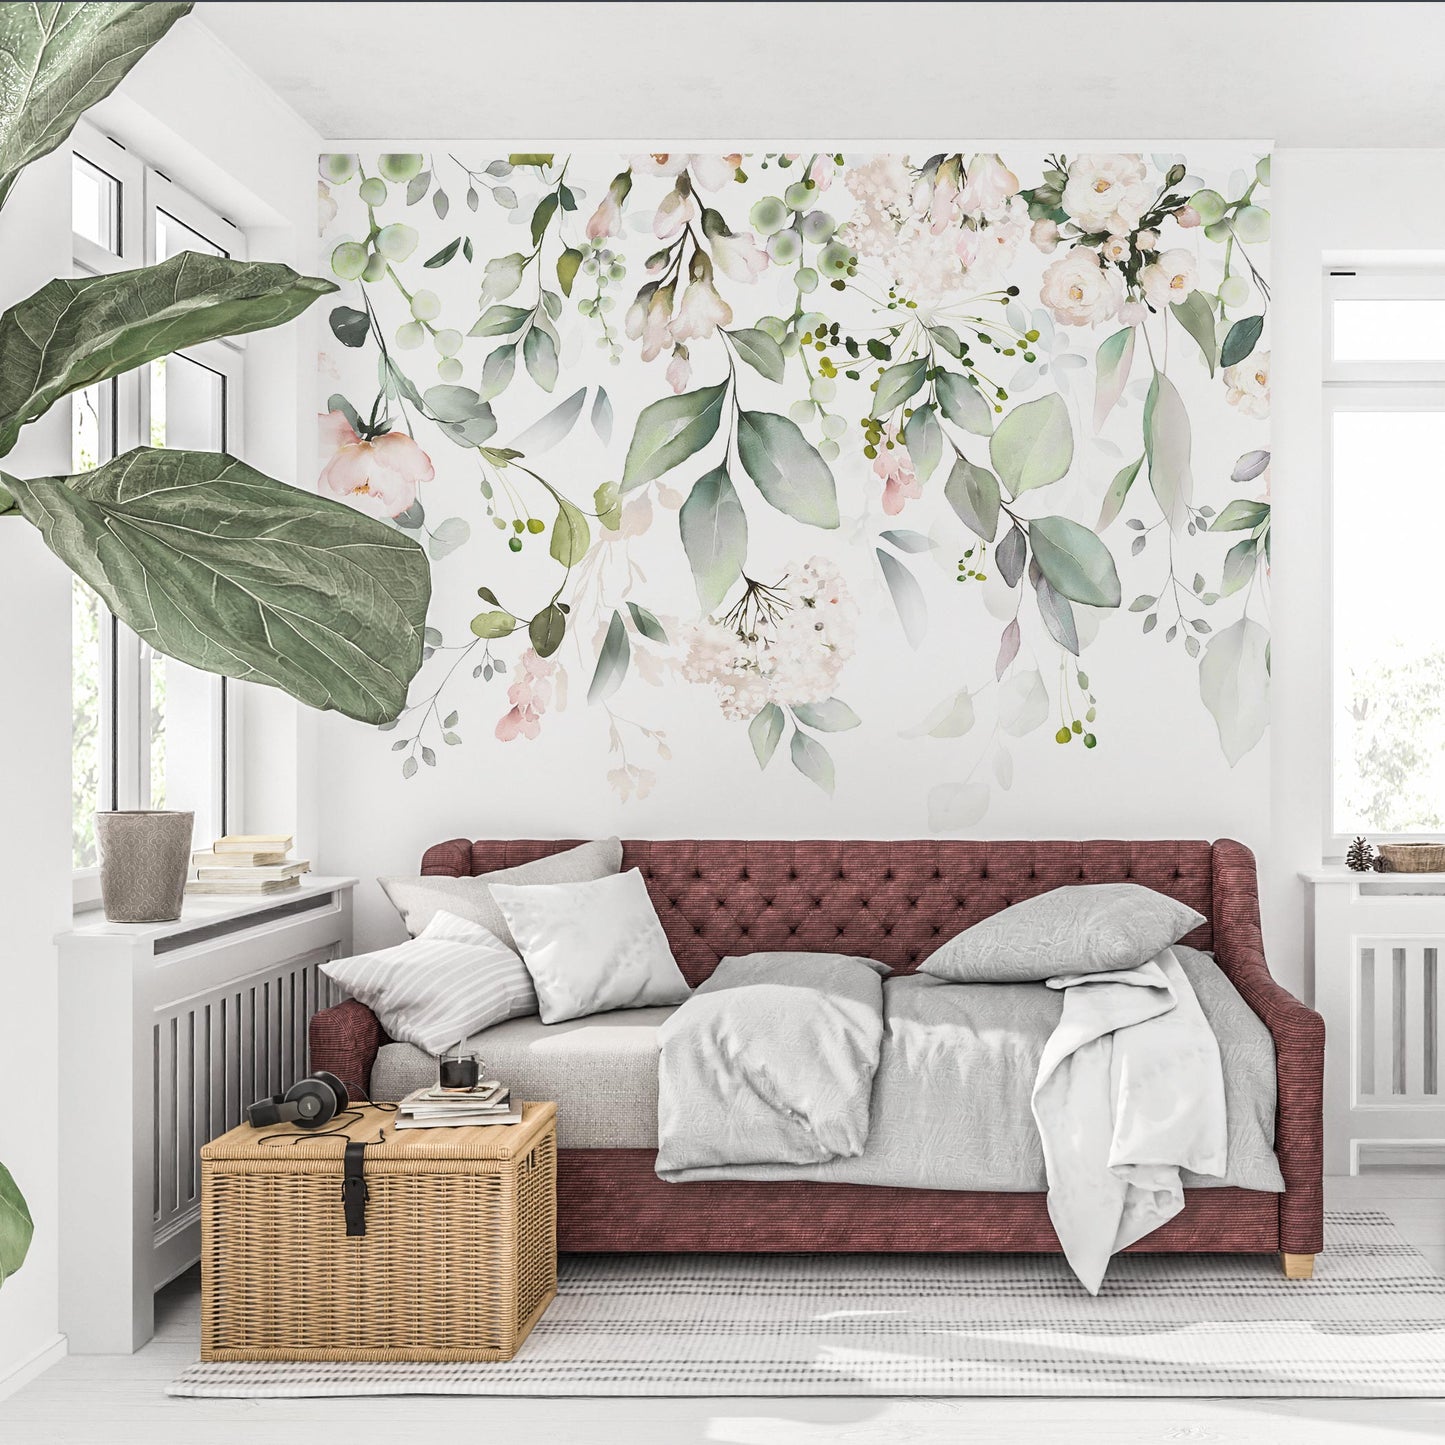 Light and Spacious Living Room with Statement Wallpaper:  Watercolor botanical wallpaper serves as a focal point in a light and spacious living room.